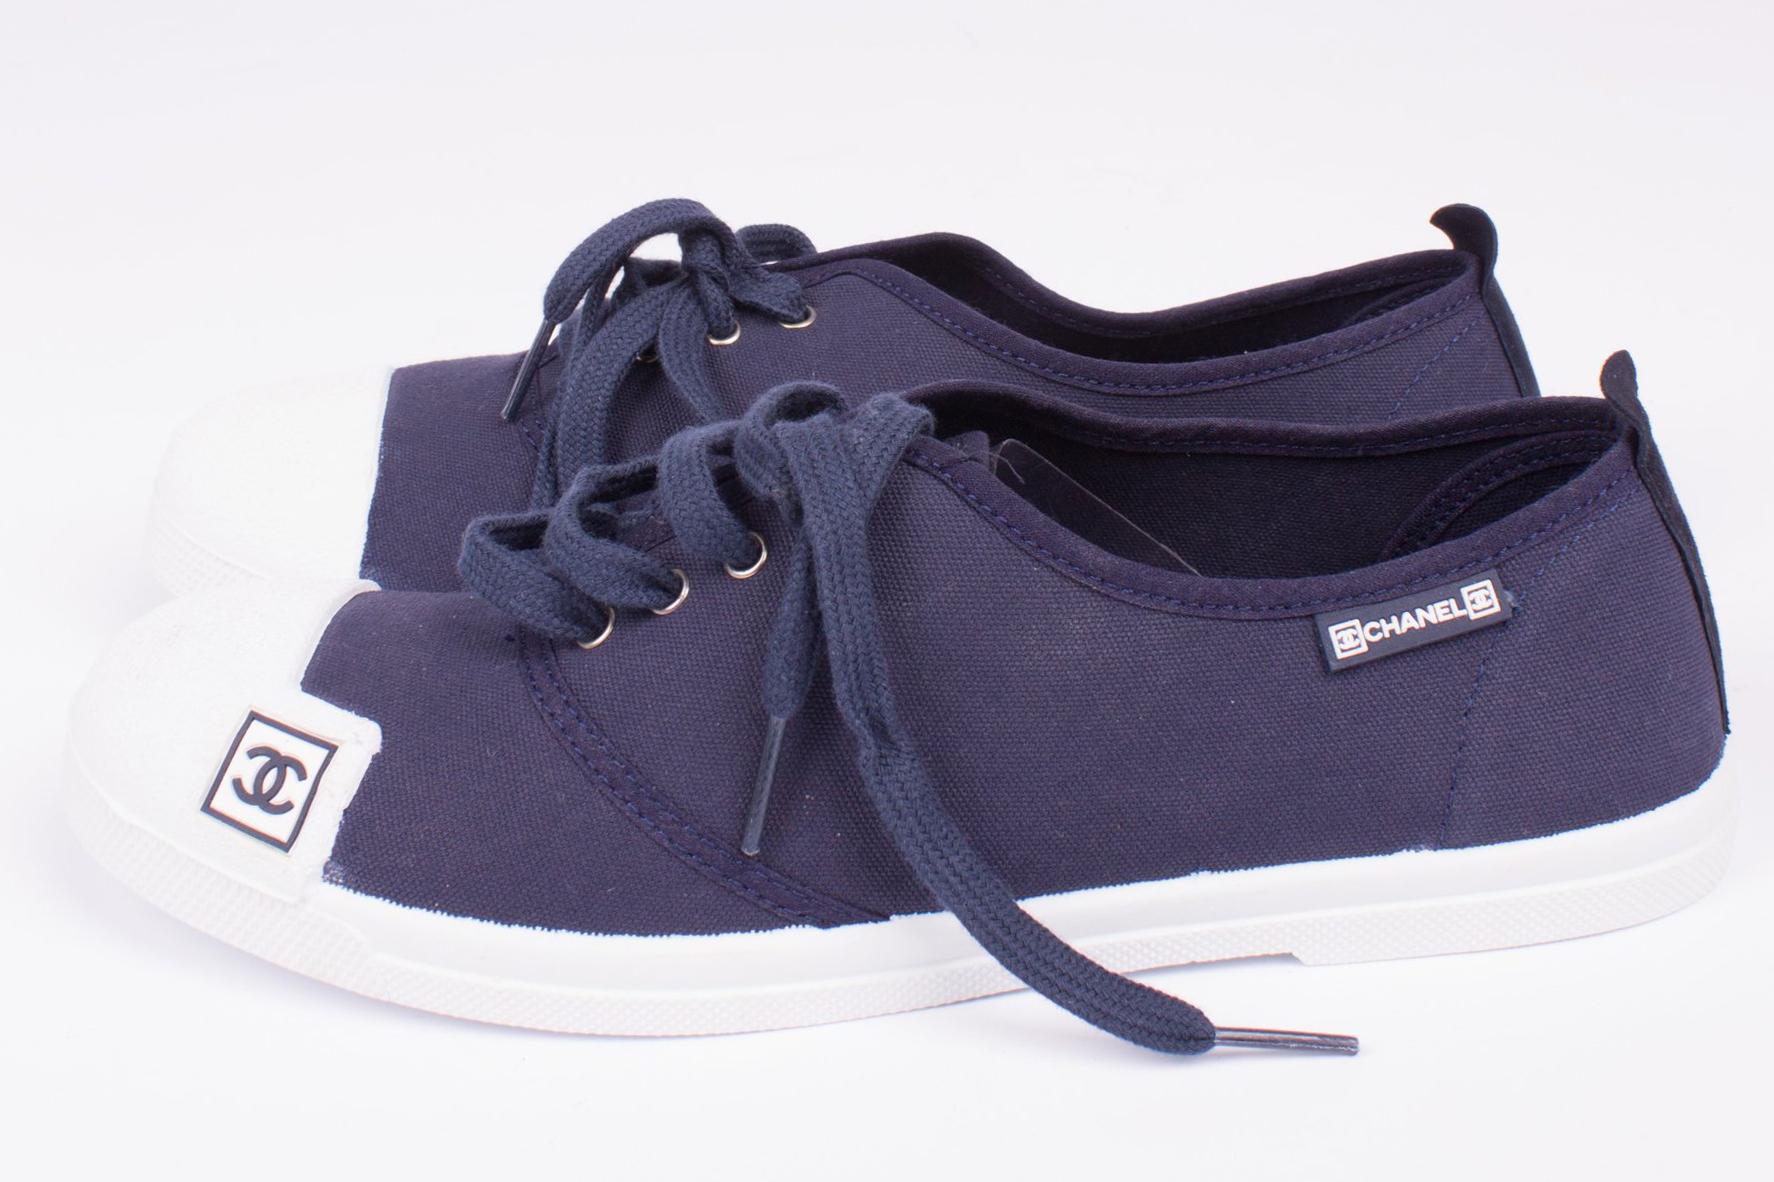 Sneakers by Chanel in dark blue canvas with a white rubber toe and sole.

A lace on the front and a white CC-logo on the tongue of the shoe. A dark blue CC logo on the toe. Heelheight 2 centimeters, lined with dark blue canvas.

New and never been